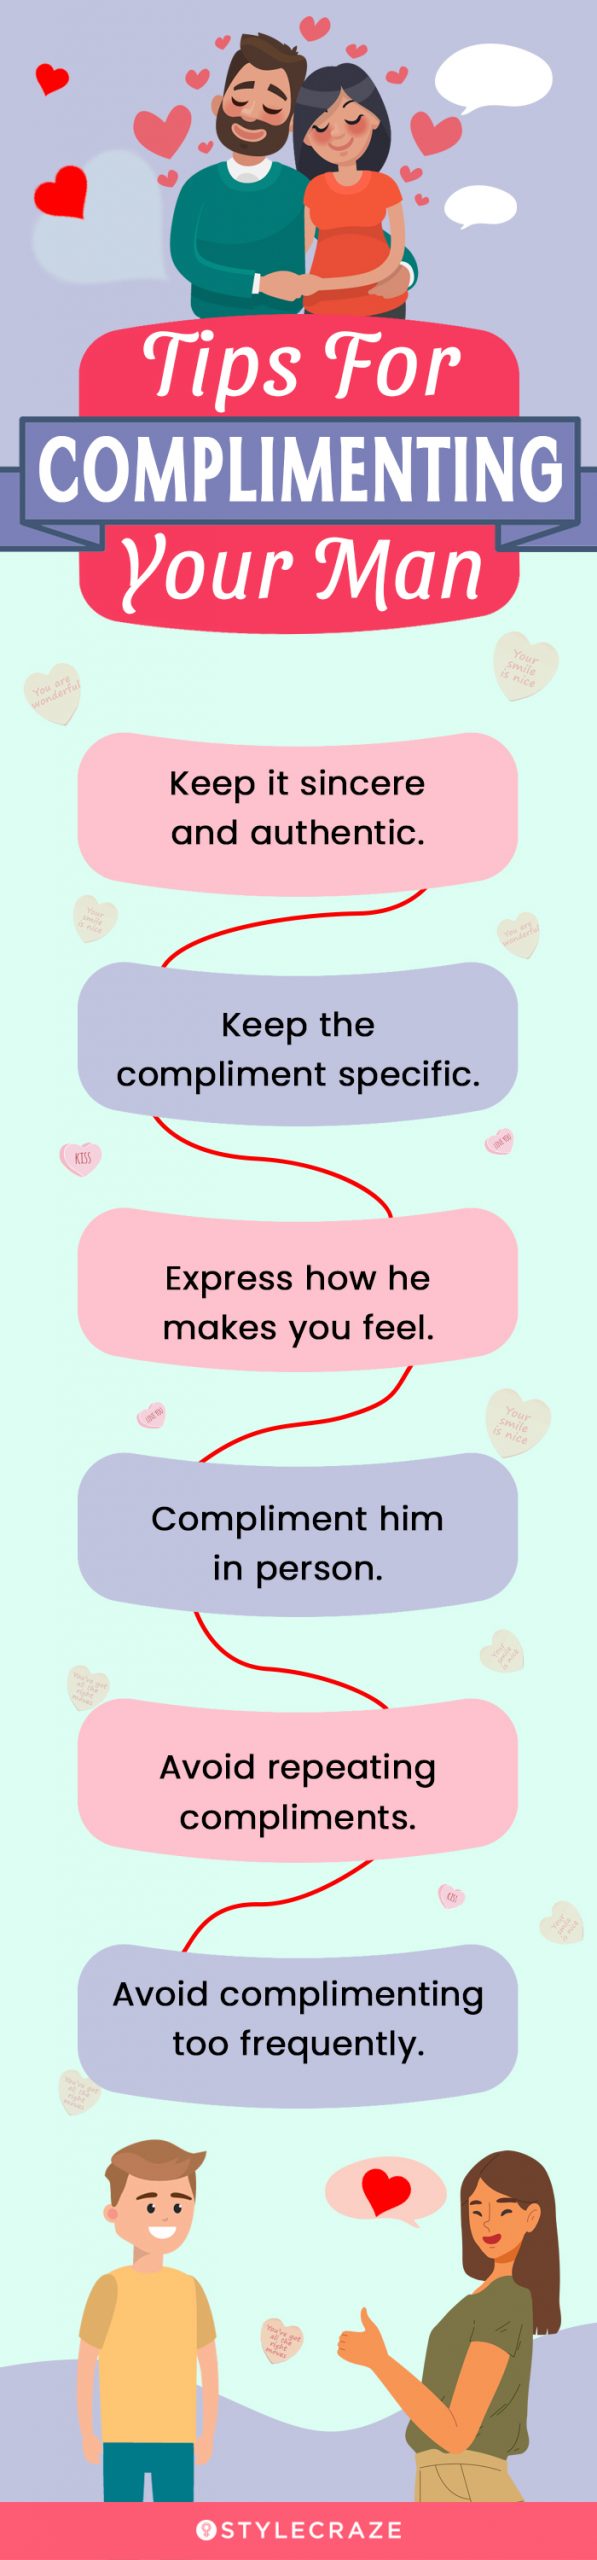 tips for complimenting your man (infographic)